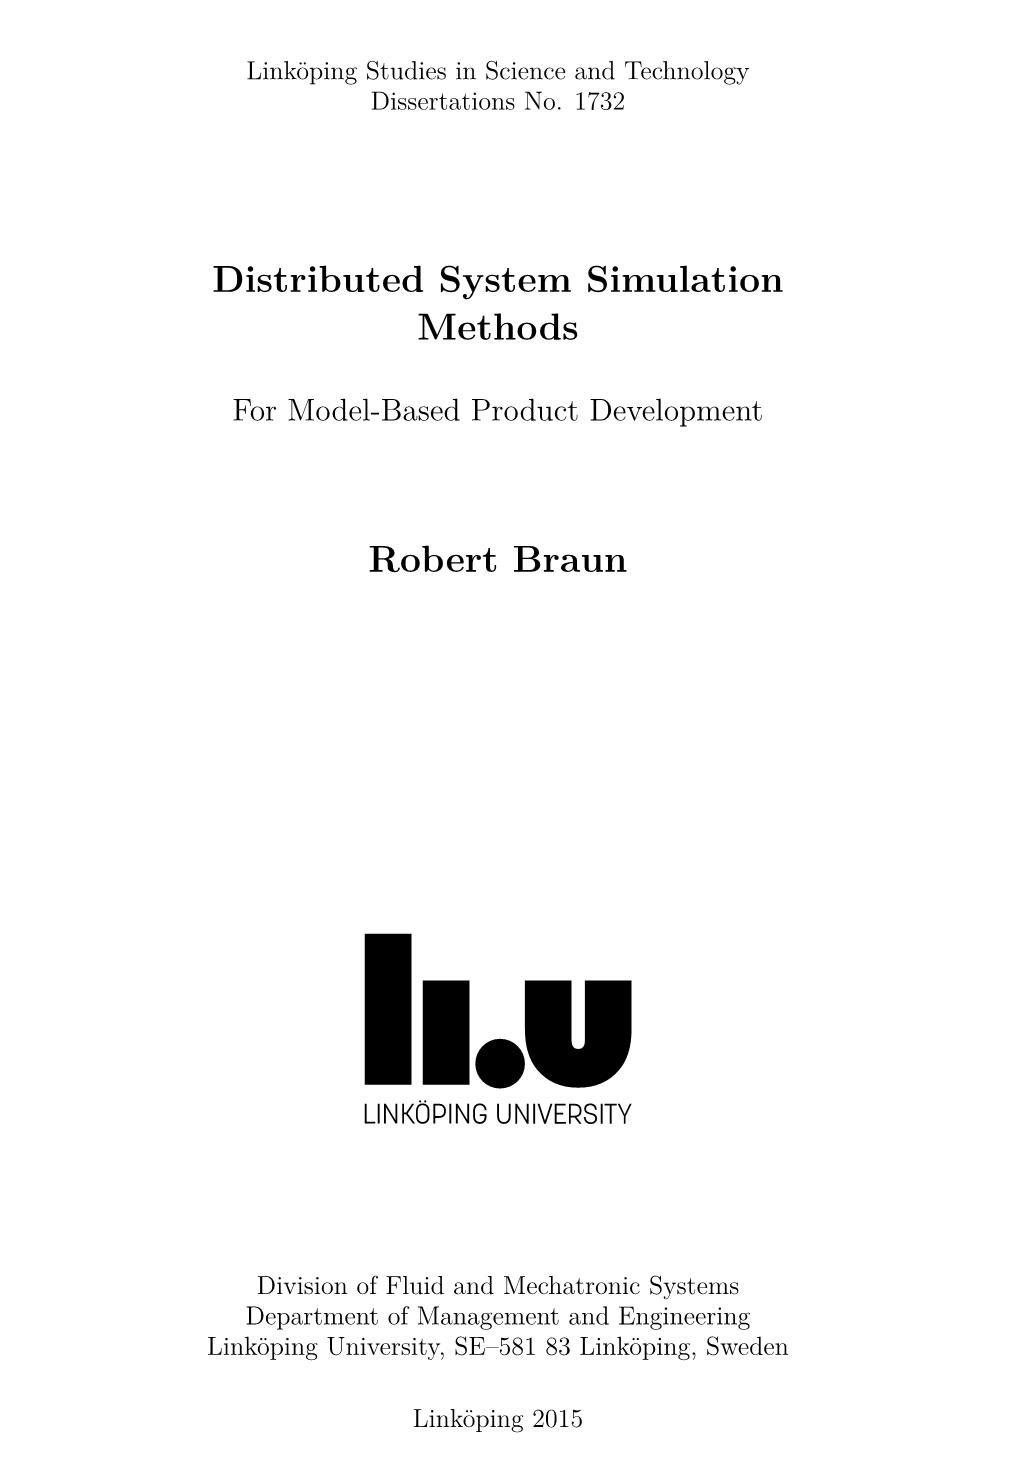 Distributed System Simulation Methods